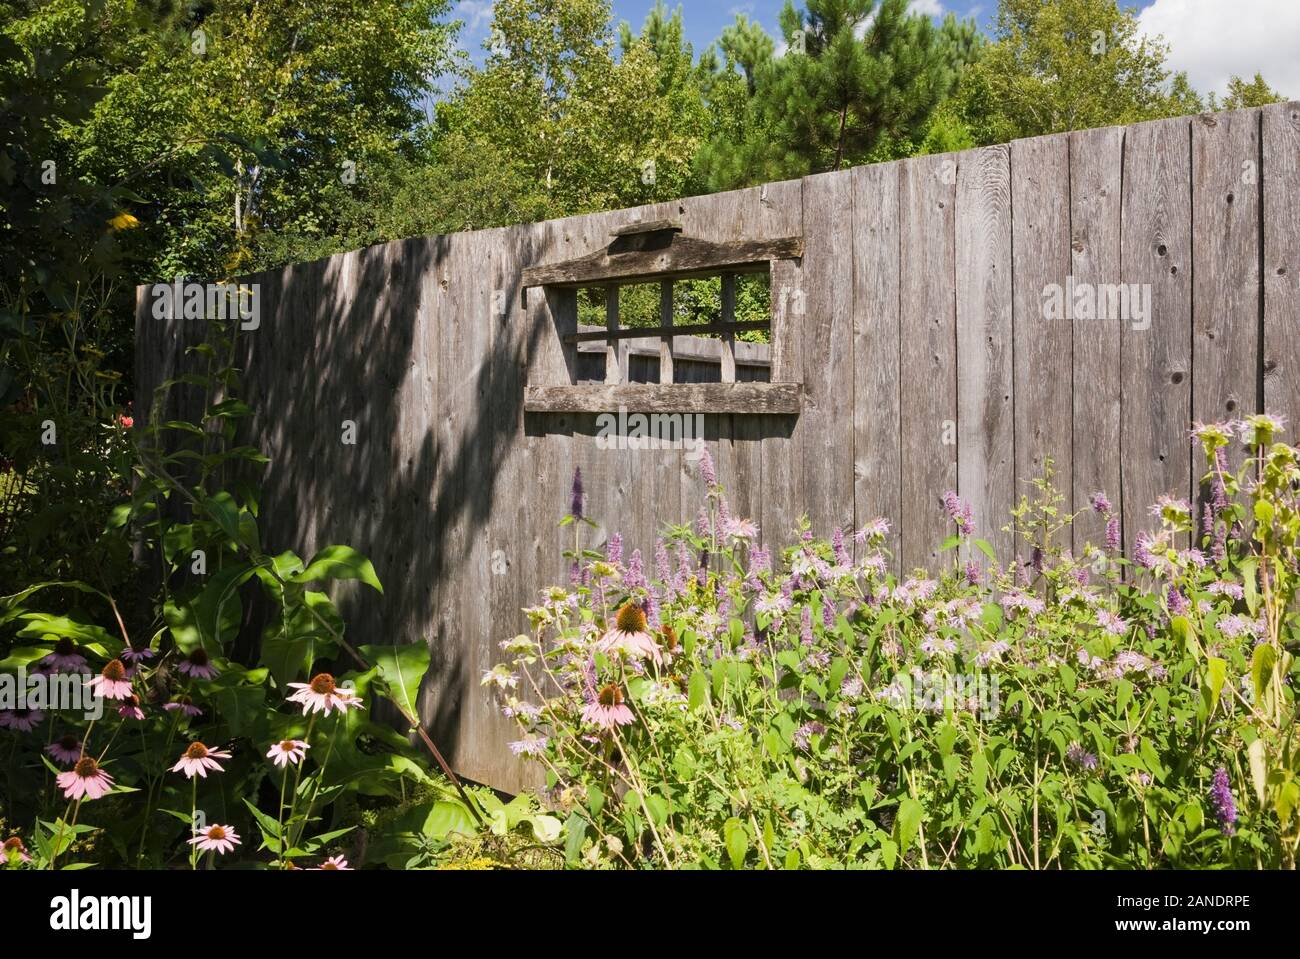 Purple Echinacea purpurea - Coneflowers and pink Lythrum - Loosestrife in front of wooden fence in backyard garden in summer. Stock Photo